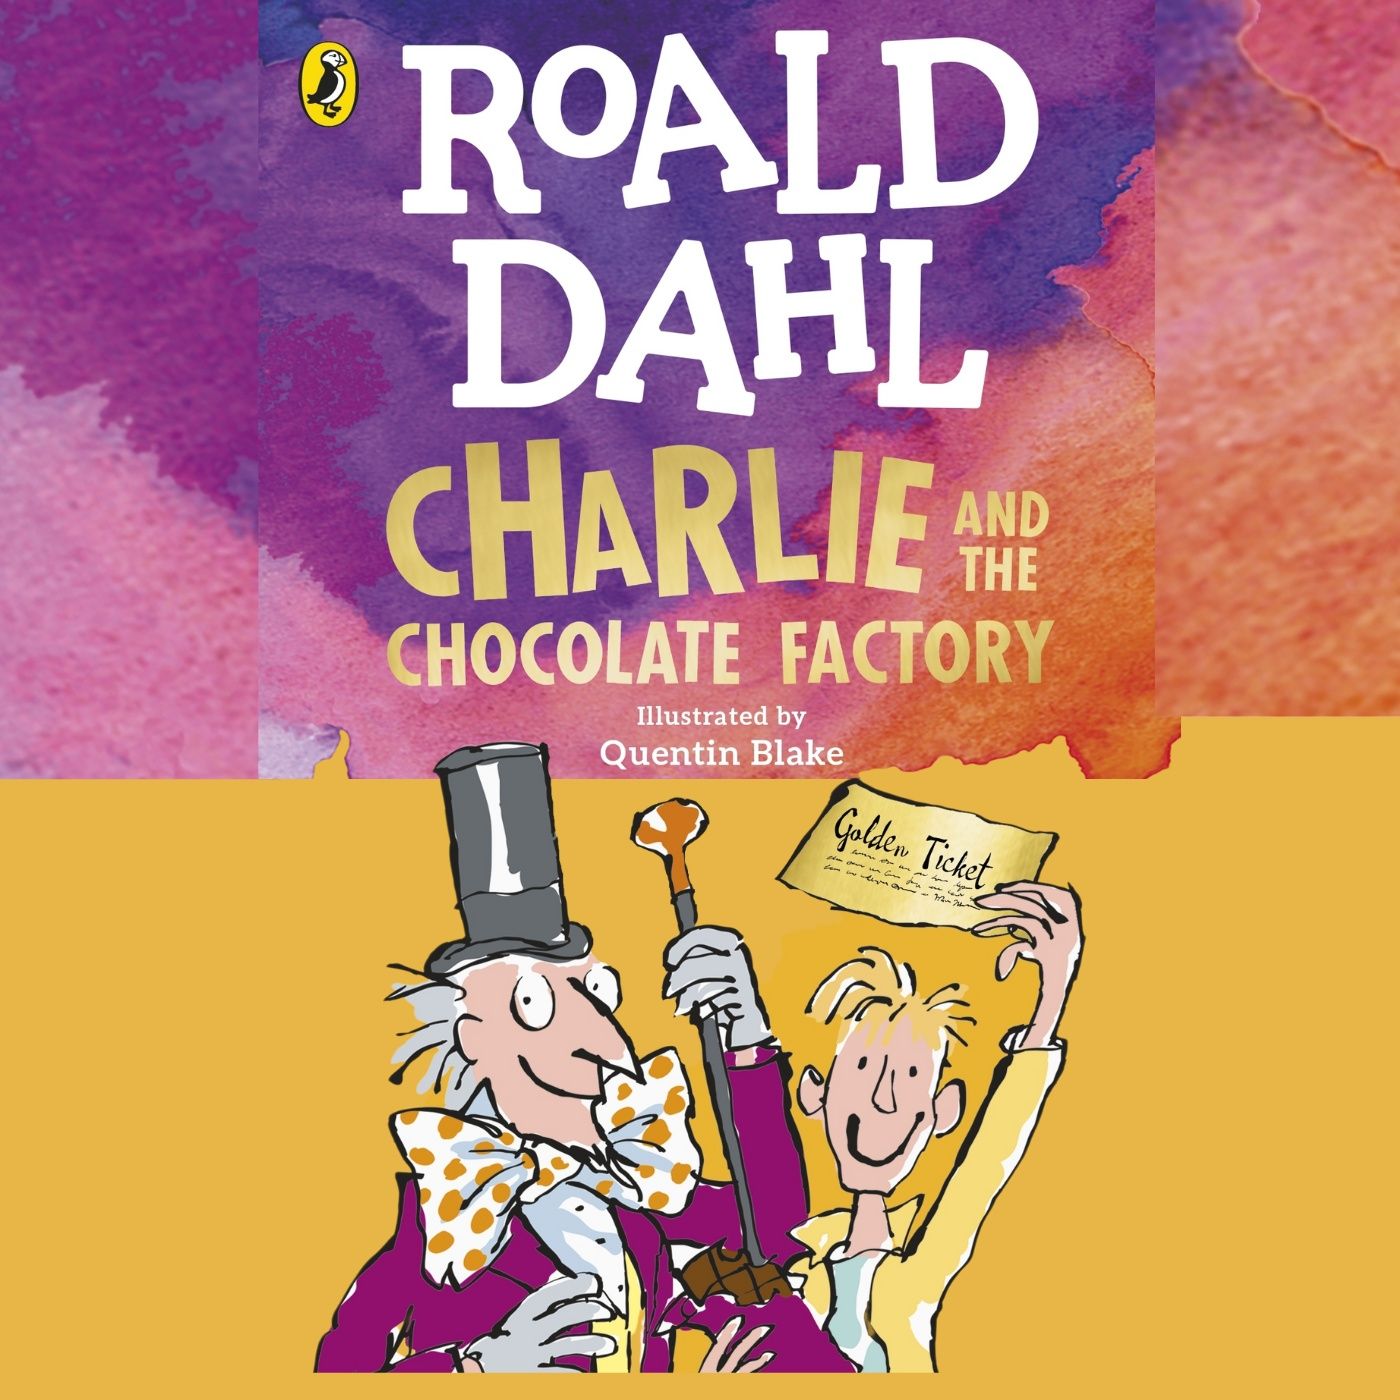 Charlie and the Chocolate Factory by Roald Dahl - Chapter 8 Two More Golden Tickets Found - Read by